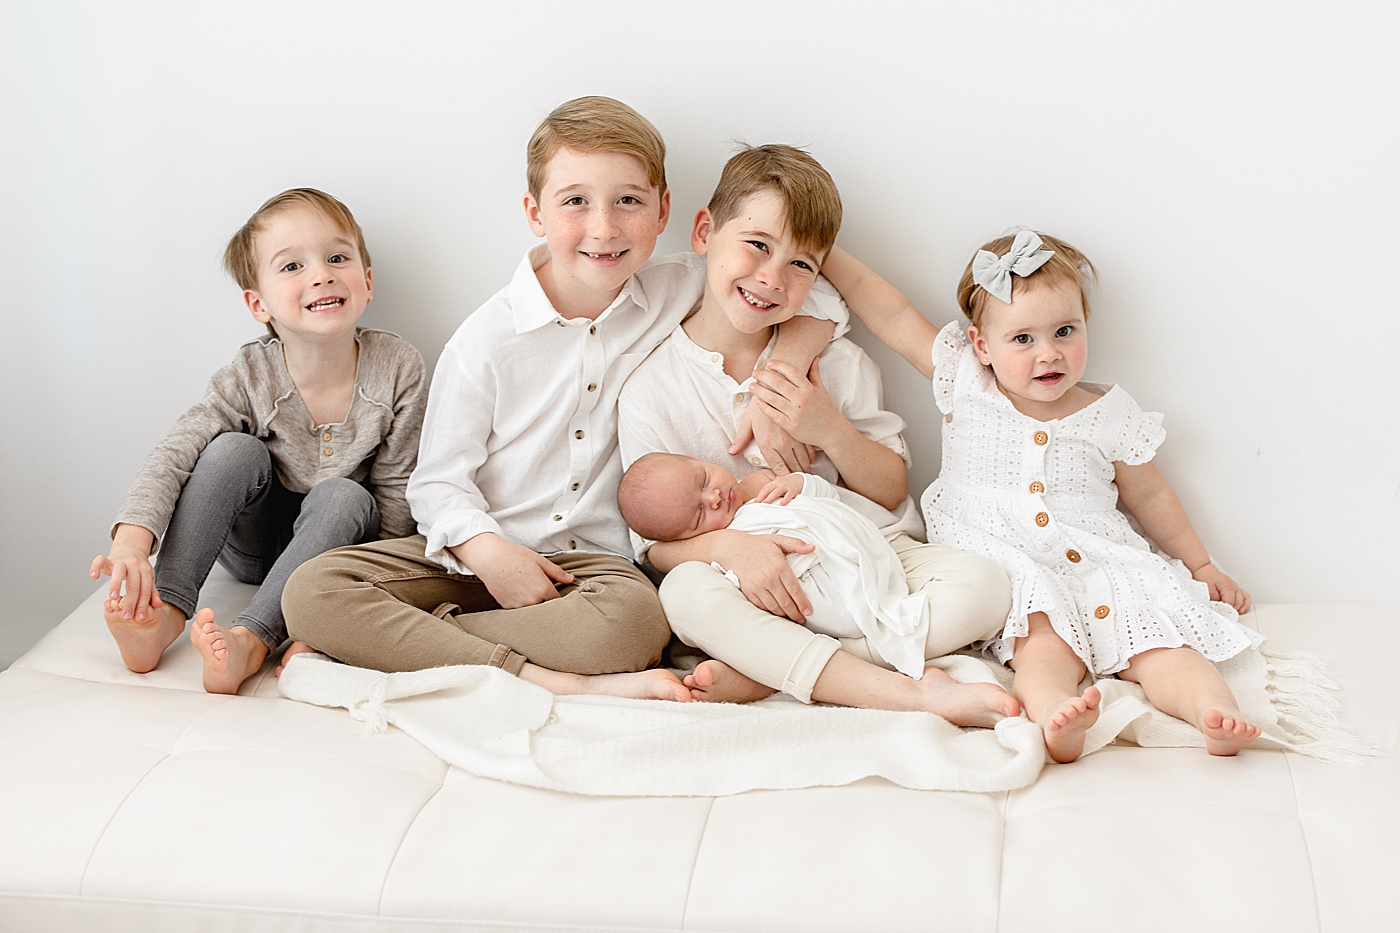 Older siblings holding their baby brother for newborn photos. Photo by Brittany Elise Photography.